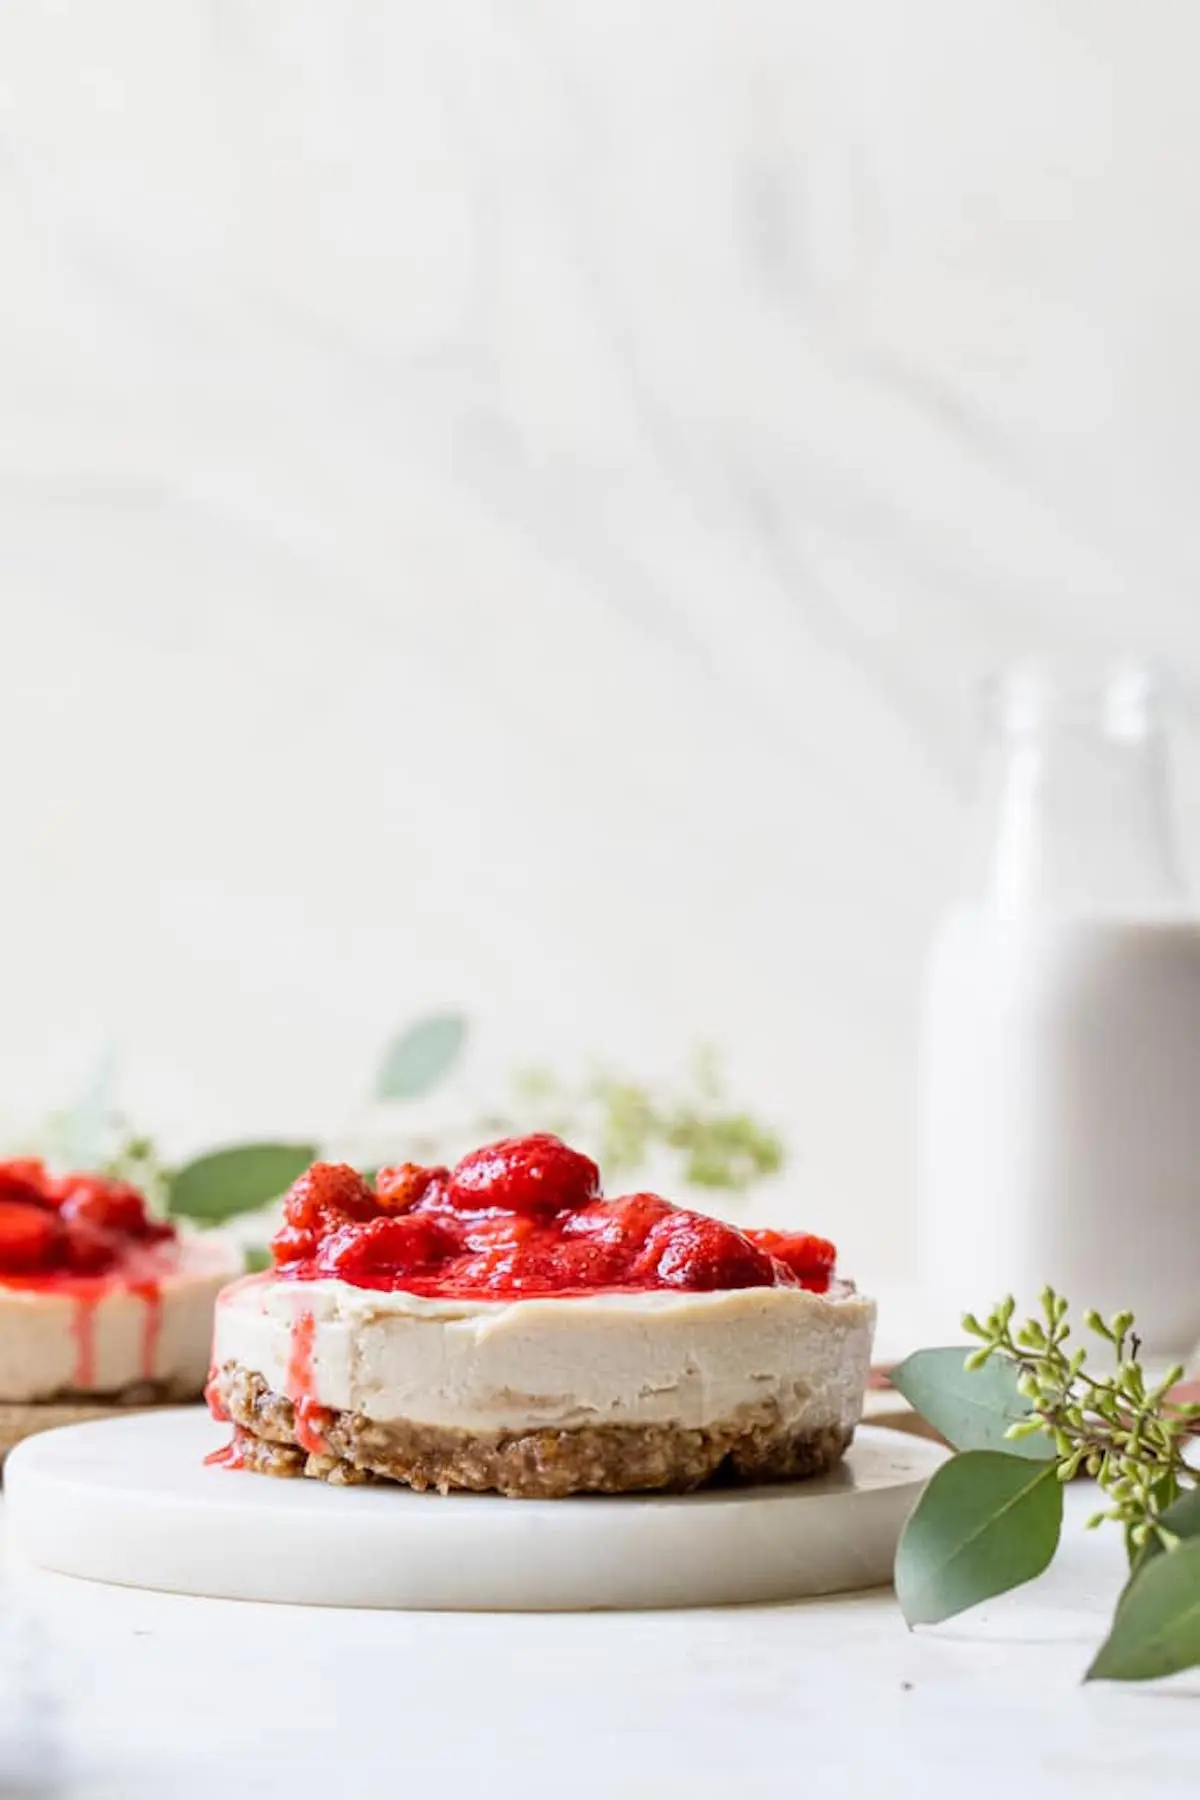 cashew cheesecake topped with strawberries